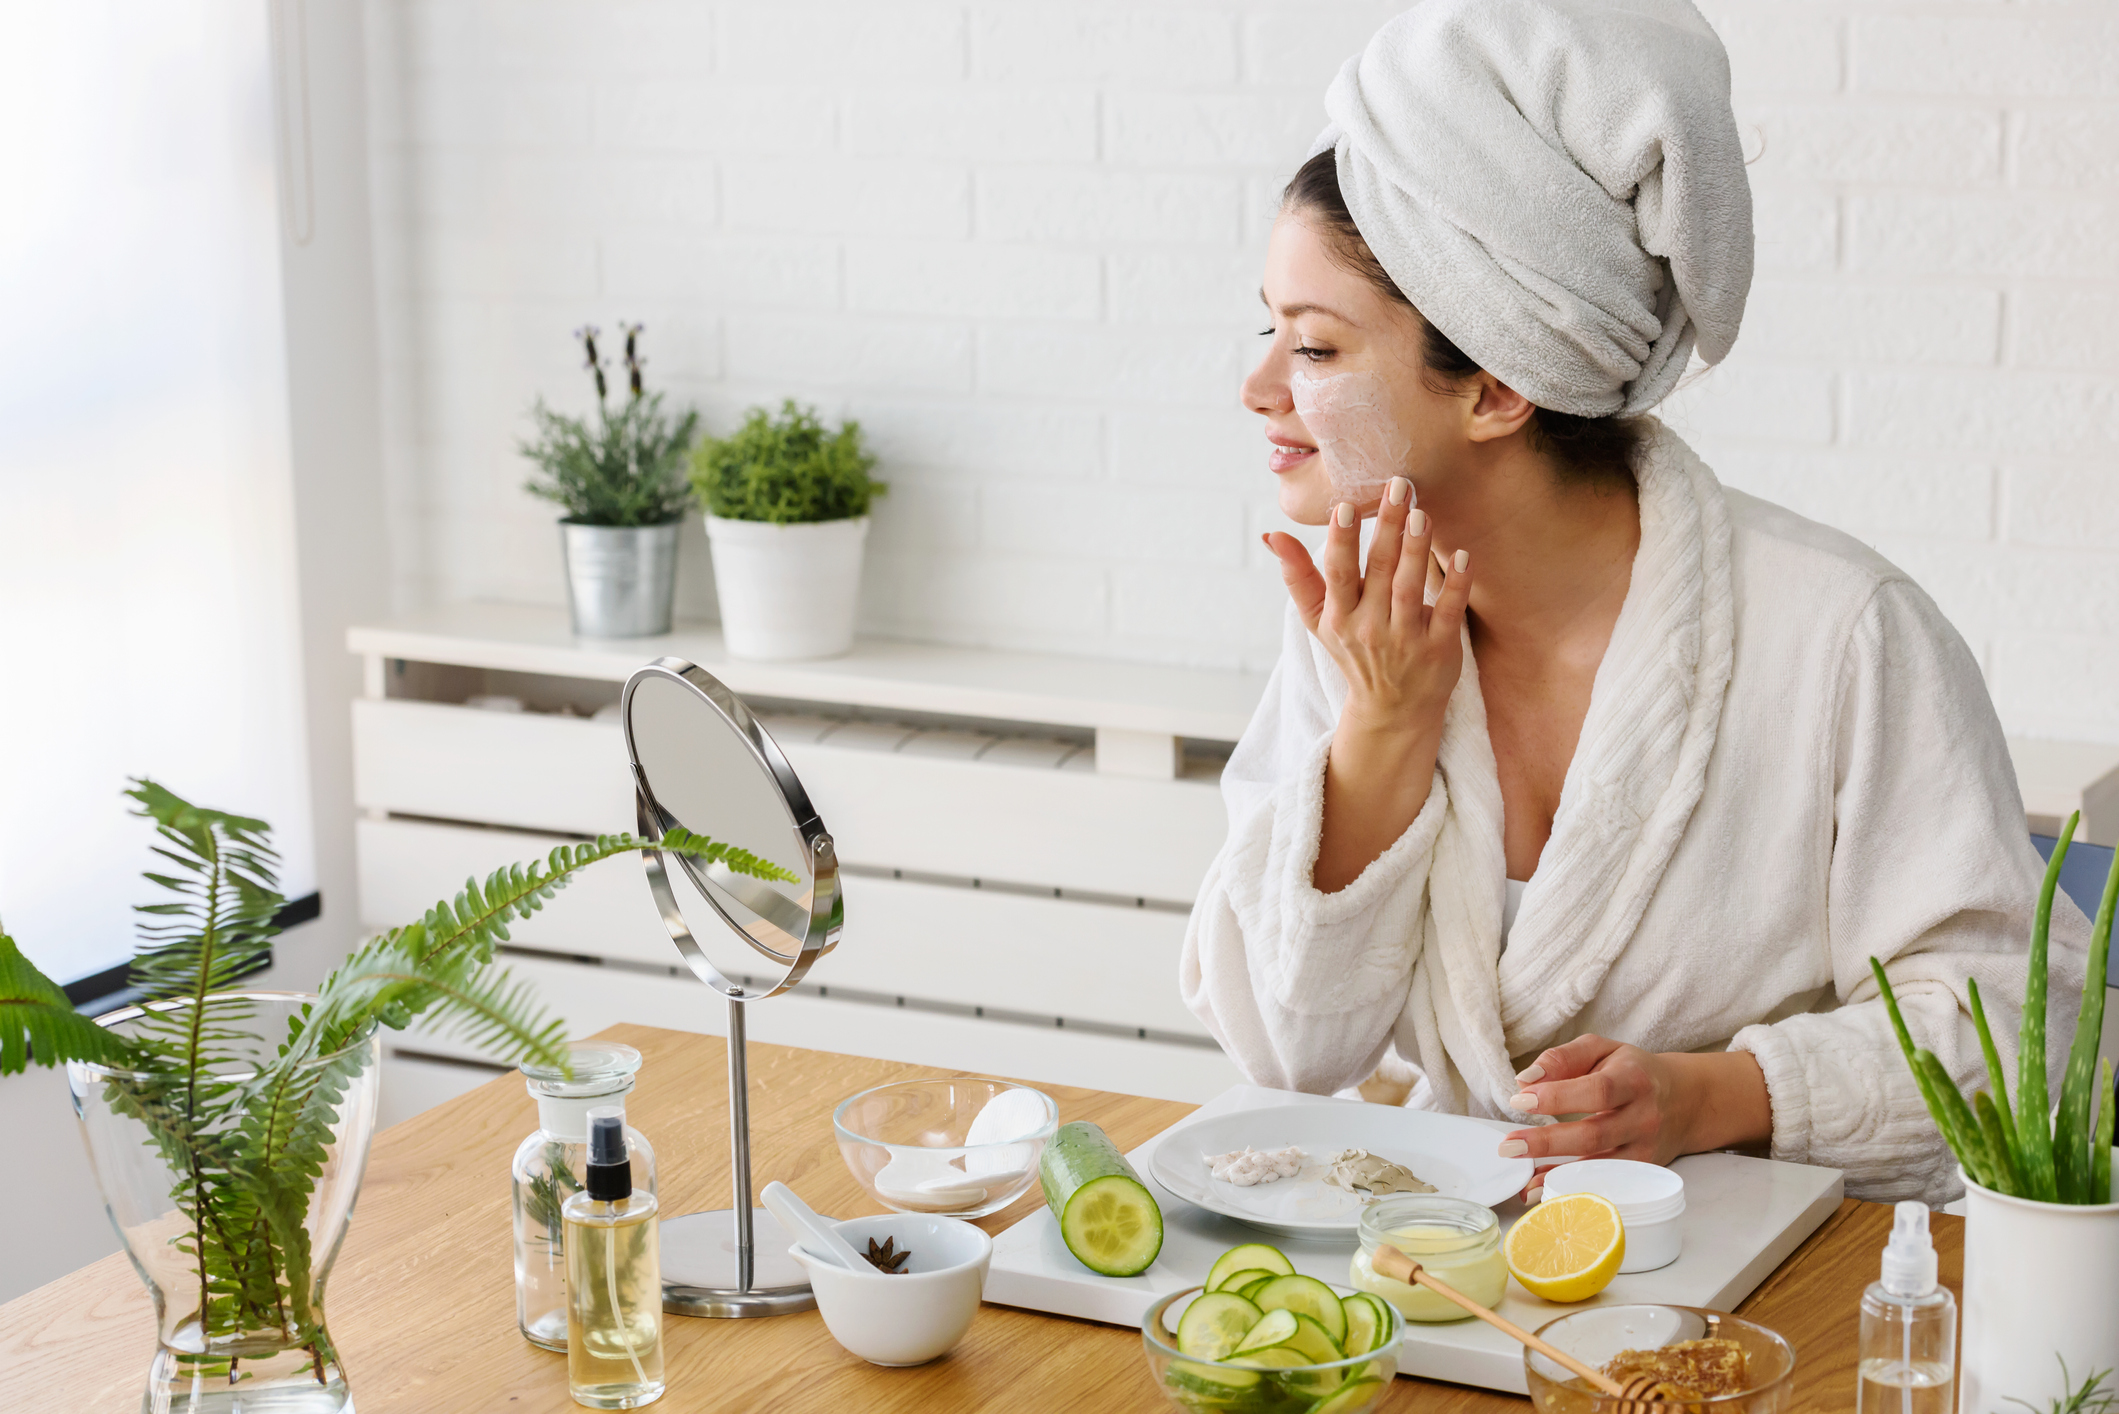 Young woman cleaning face with natural cosmetics. How to get clear and glowing skin. Portrait of young woman with clay face mask on wearing bathrobe. Homemade Face Mask